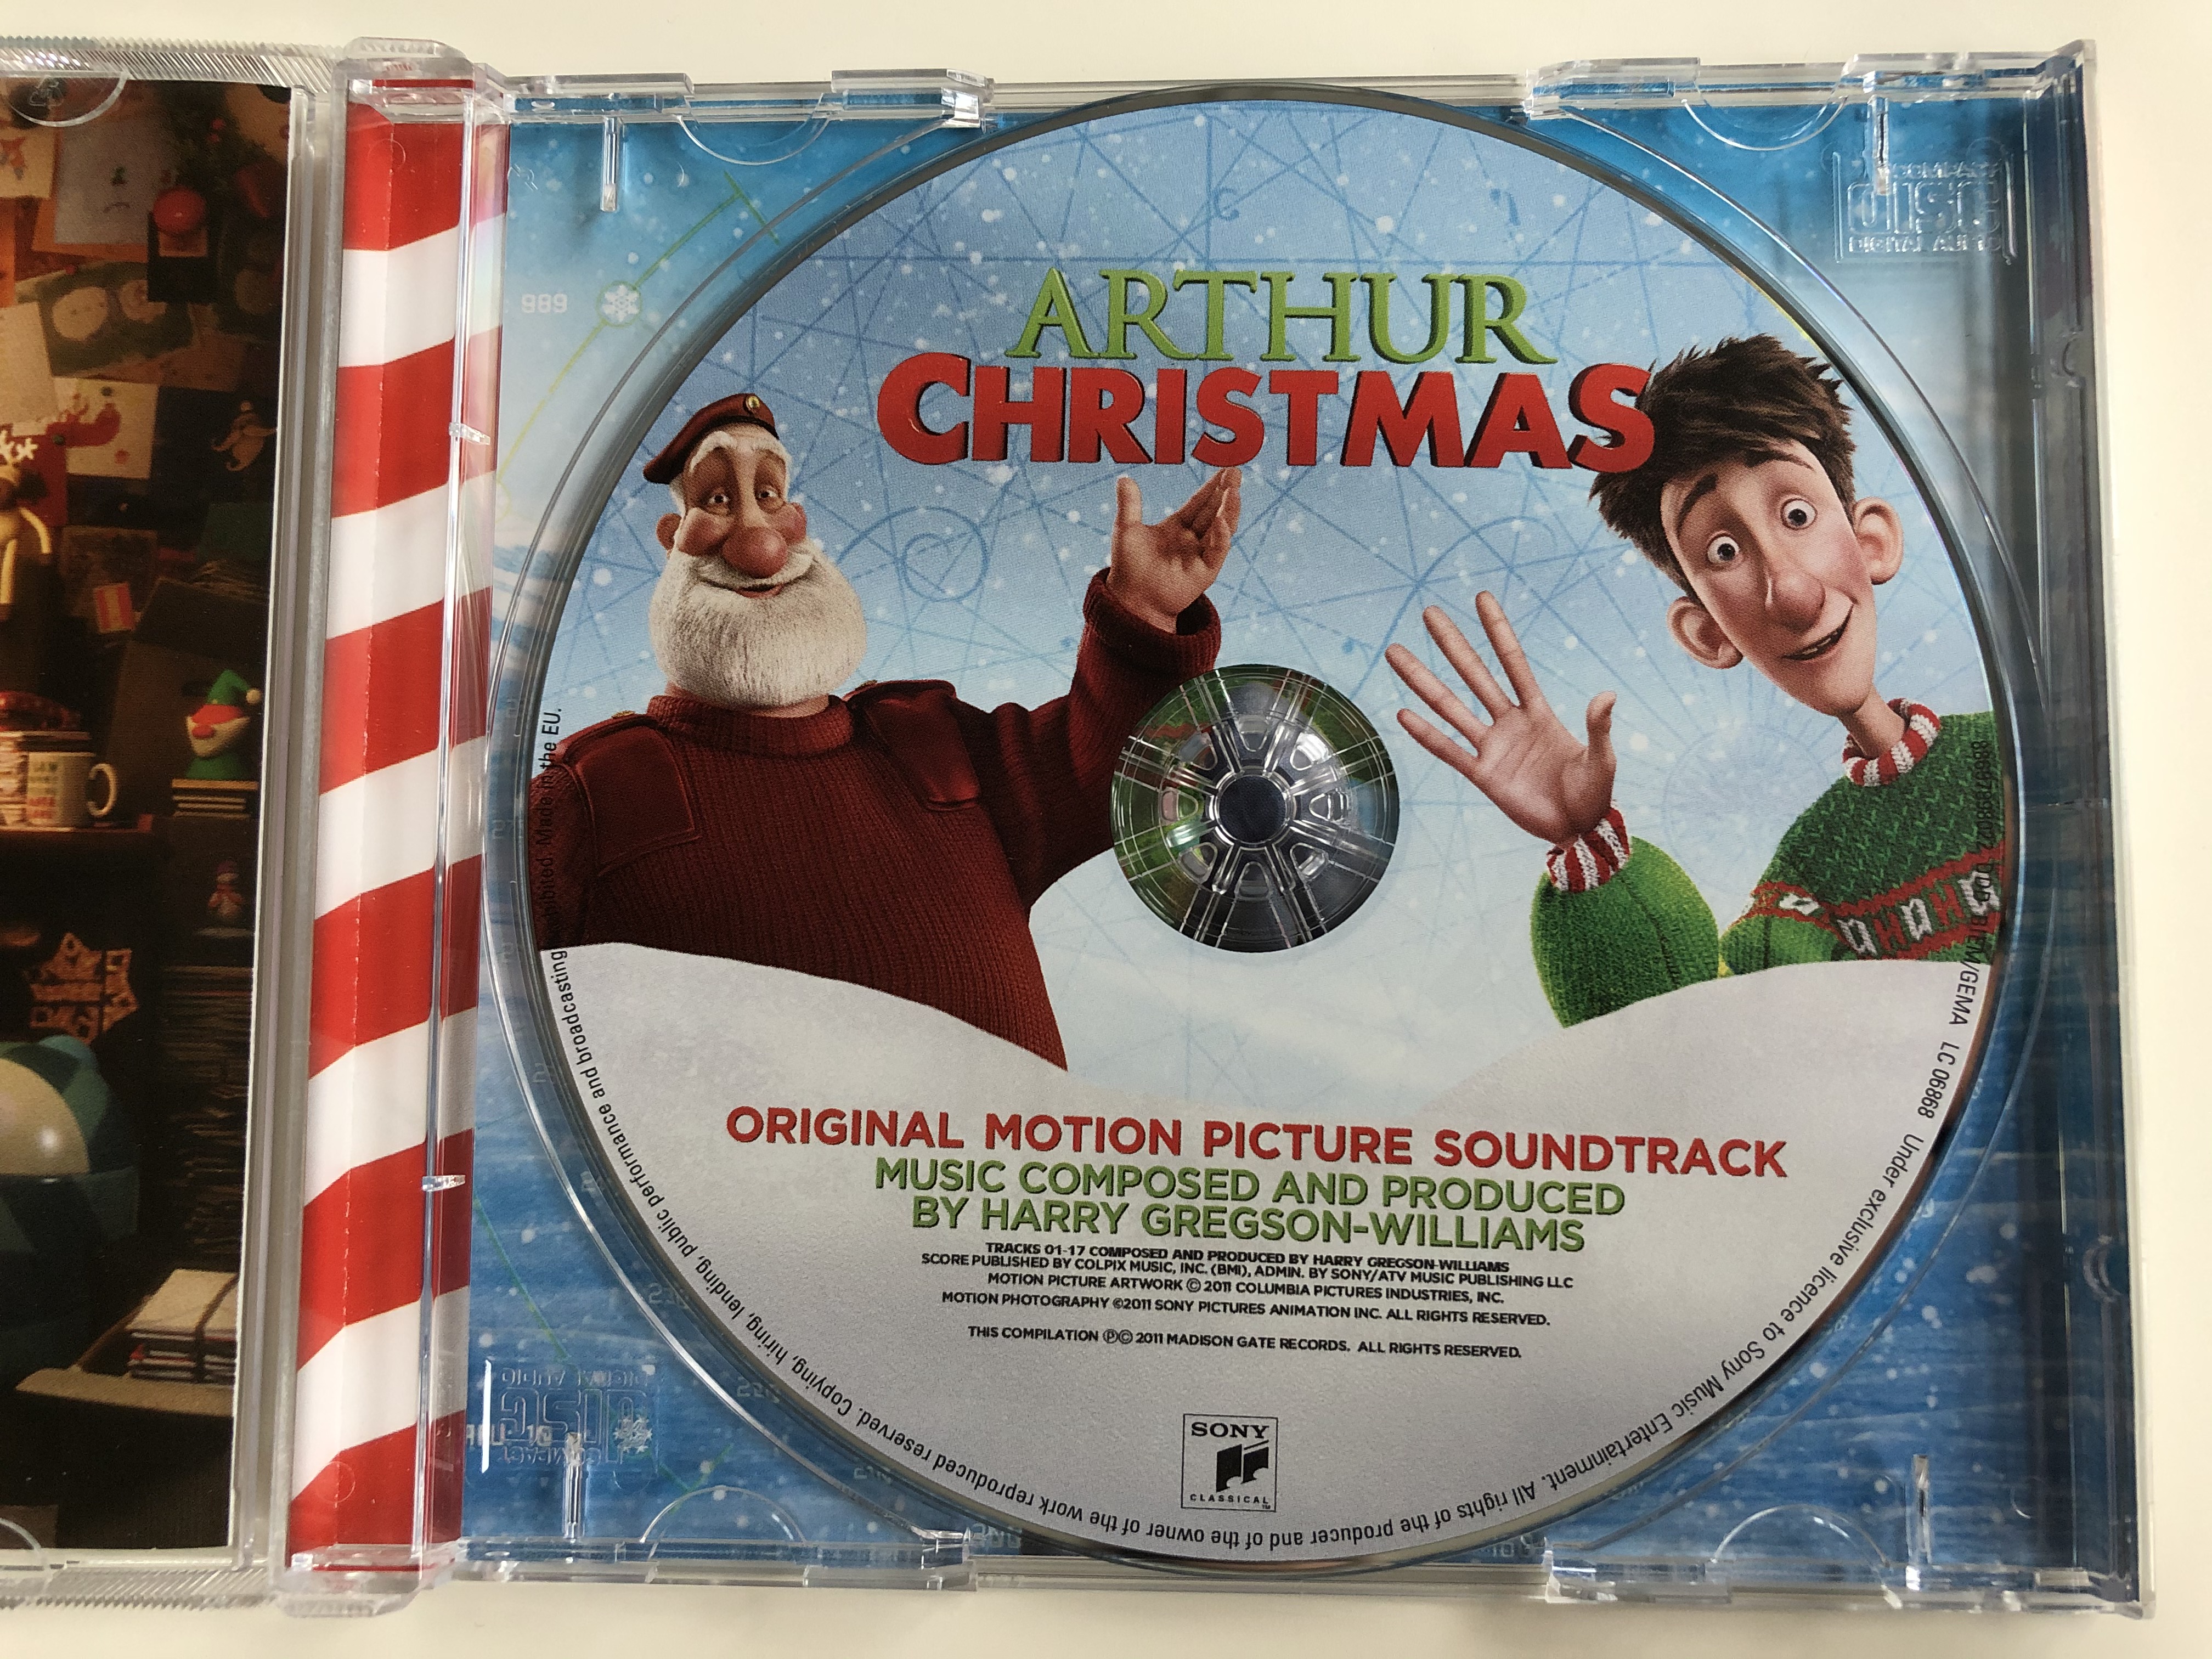 arthur-christmas-original-motion-picture-soundtrack-music-composed-and-produced-by-harry-gregson-williams-sony-classical-audio-cd-2011-88697998022-3-.jpg